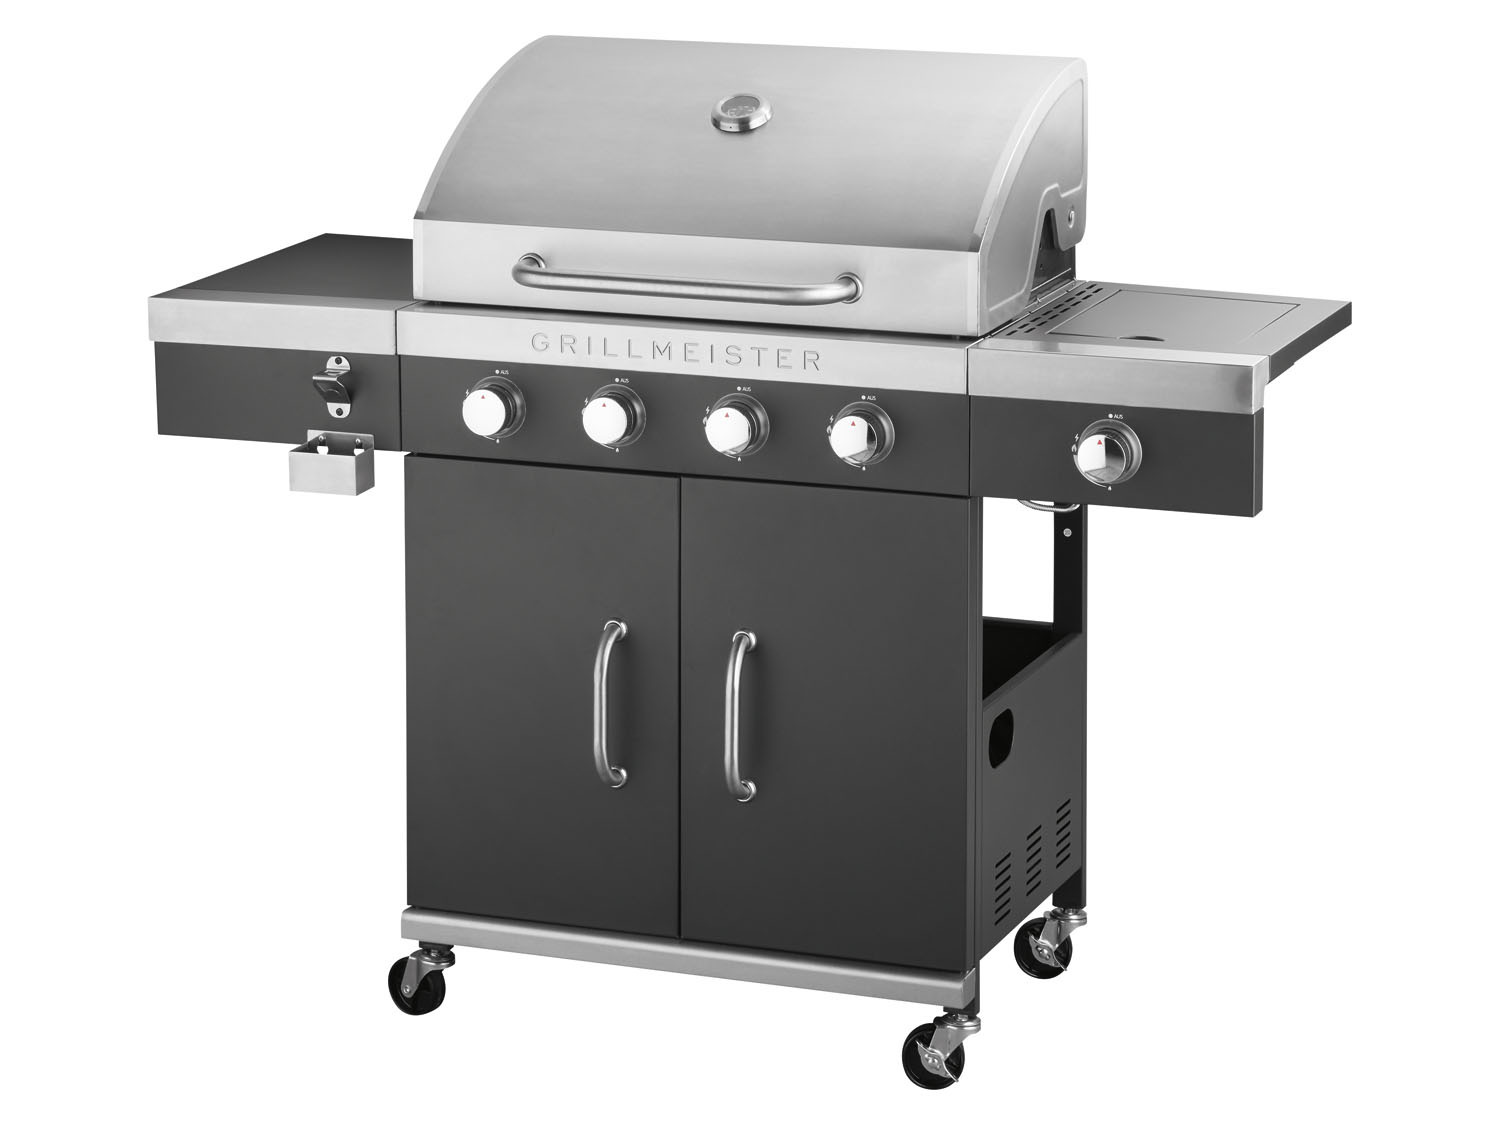 GRILLMEISTER Gasgrill, 4plus1 | 19,7 Brenner, kW LIDL